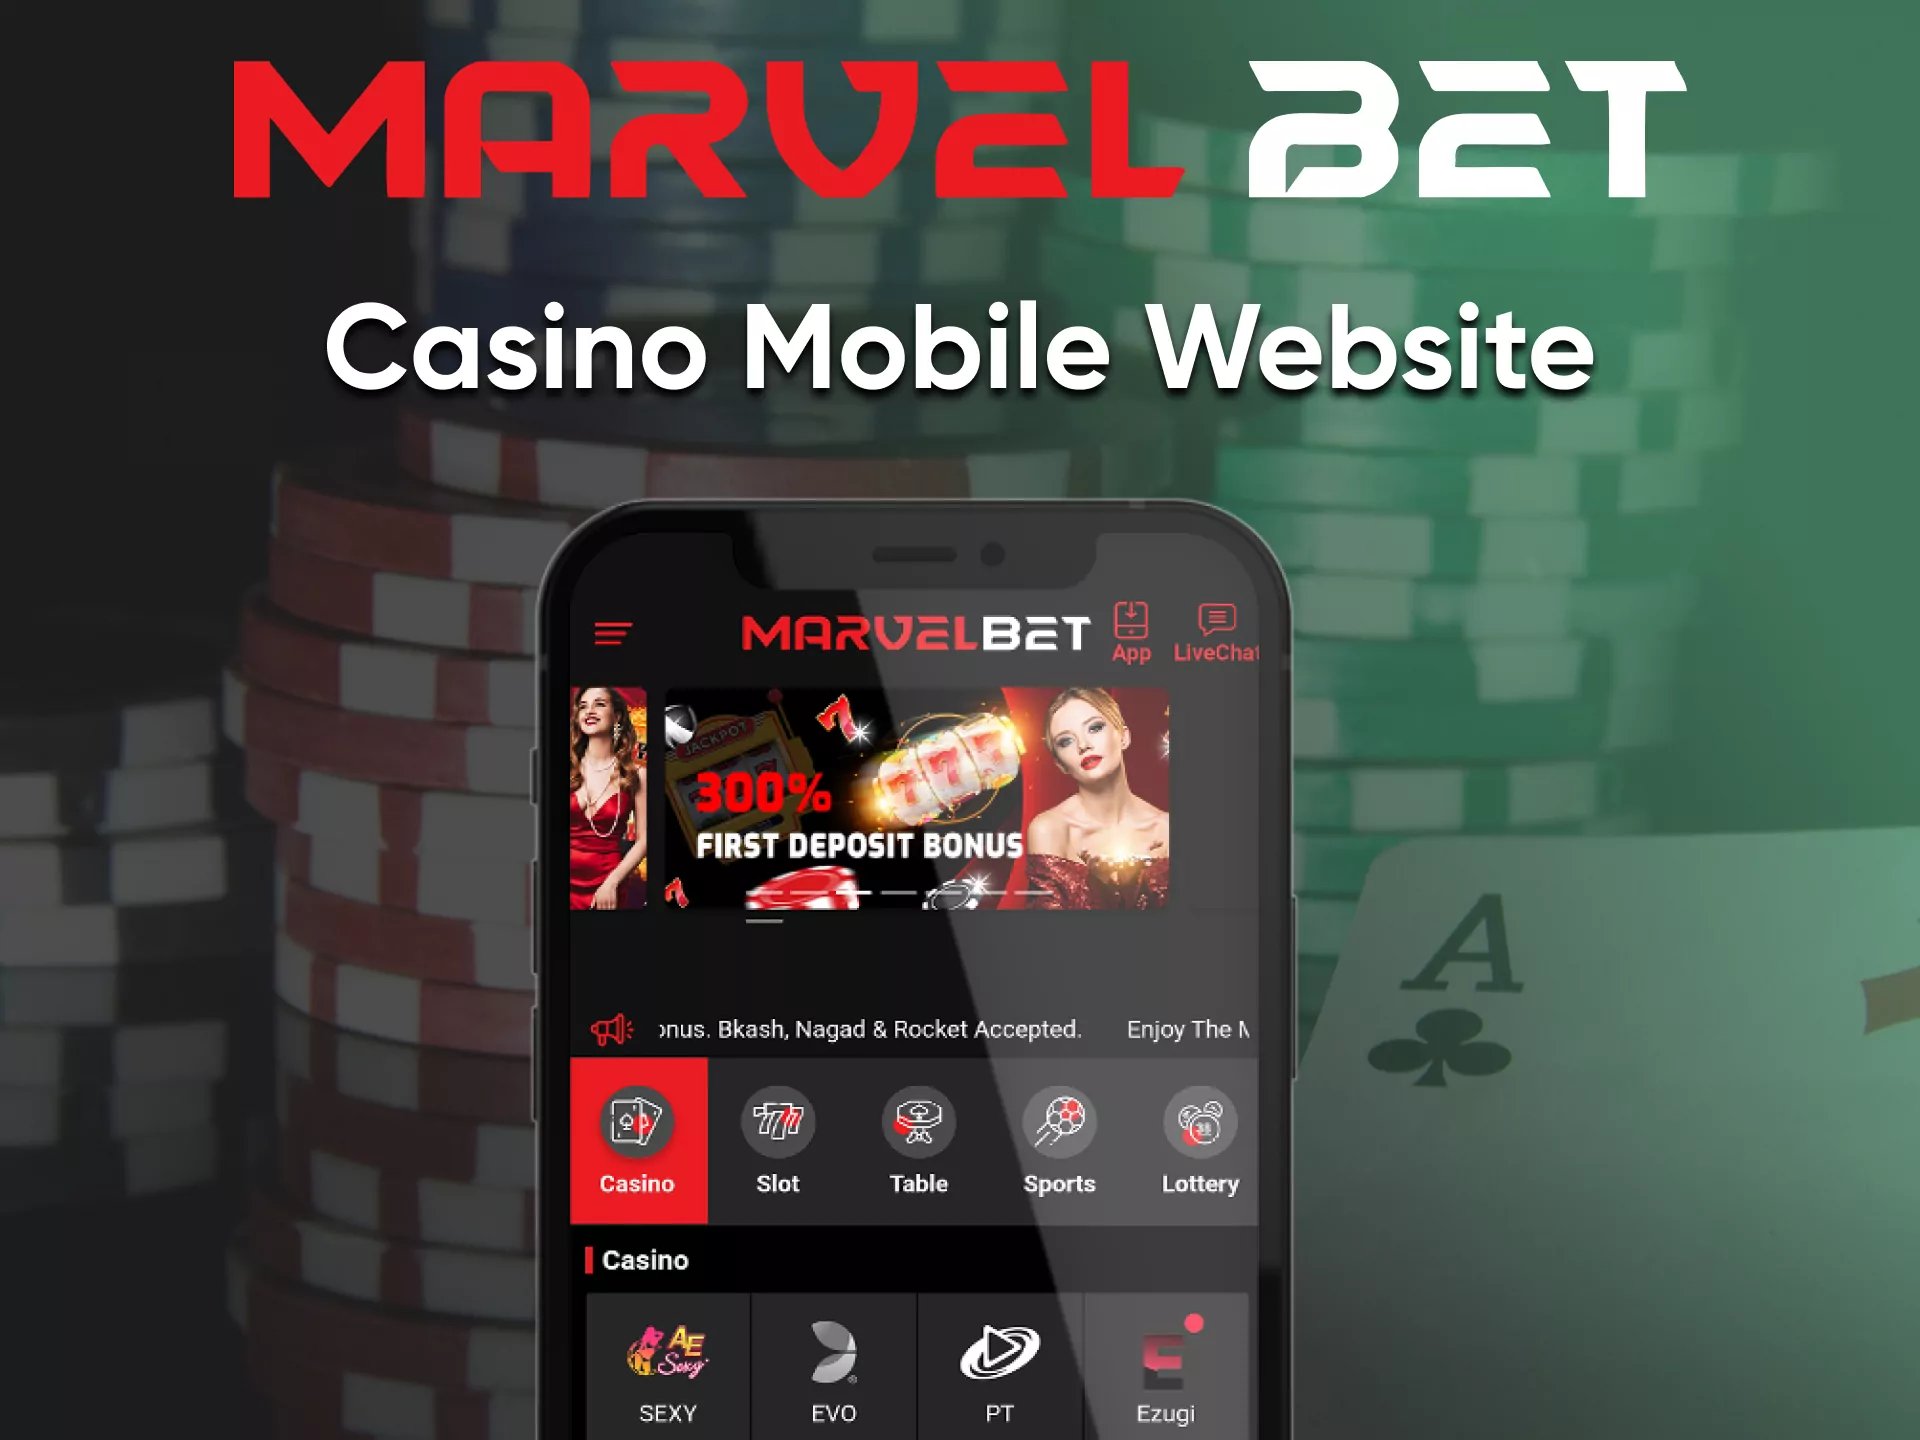 Play casino from Marvelbet on your smartphone.